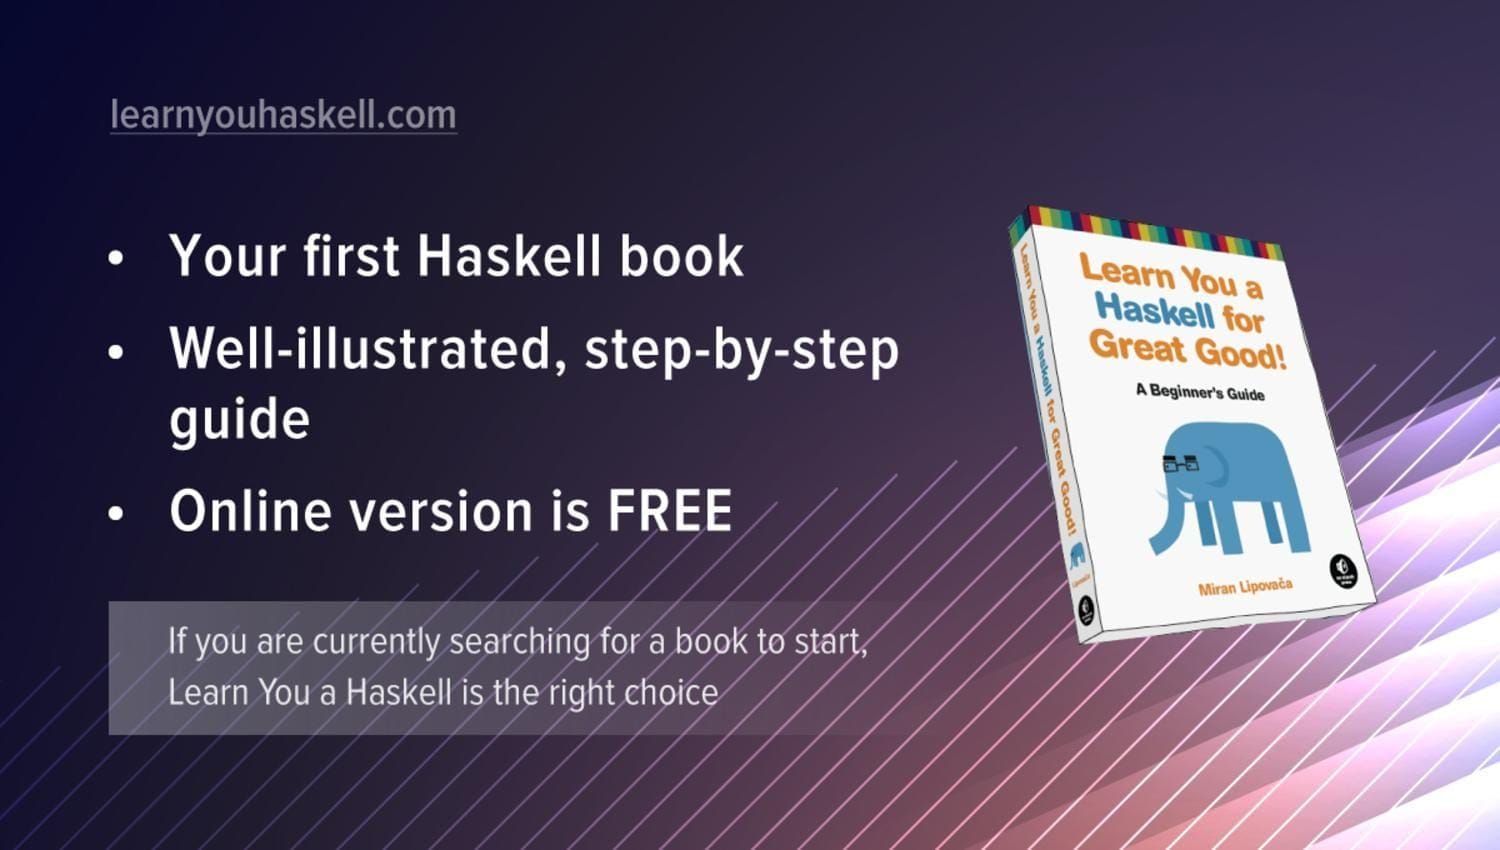 Learn You a Haskell